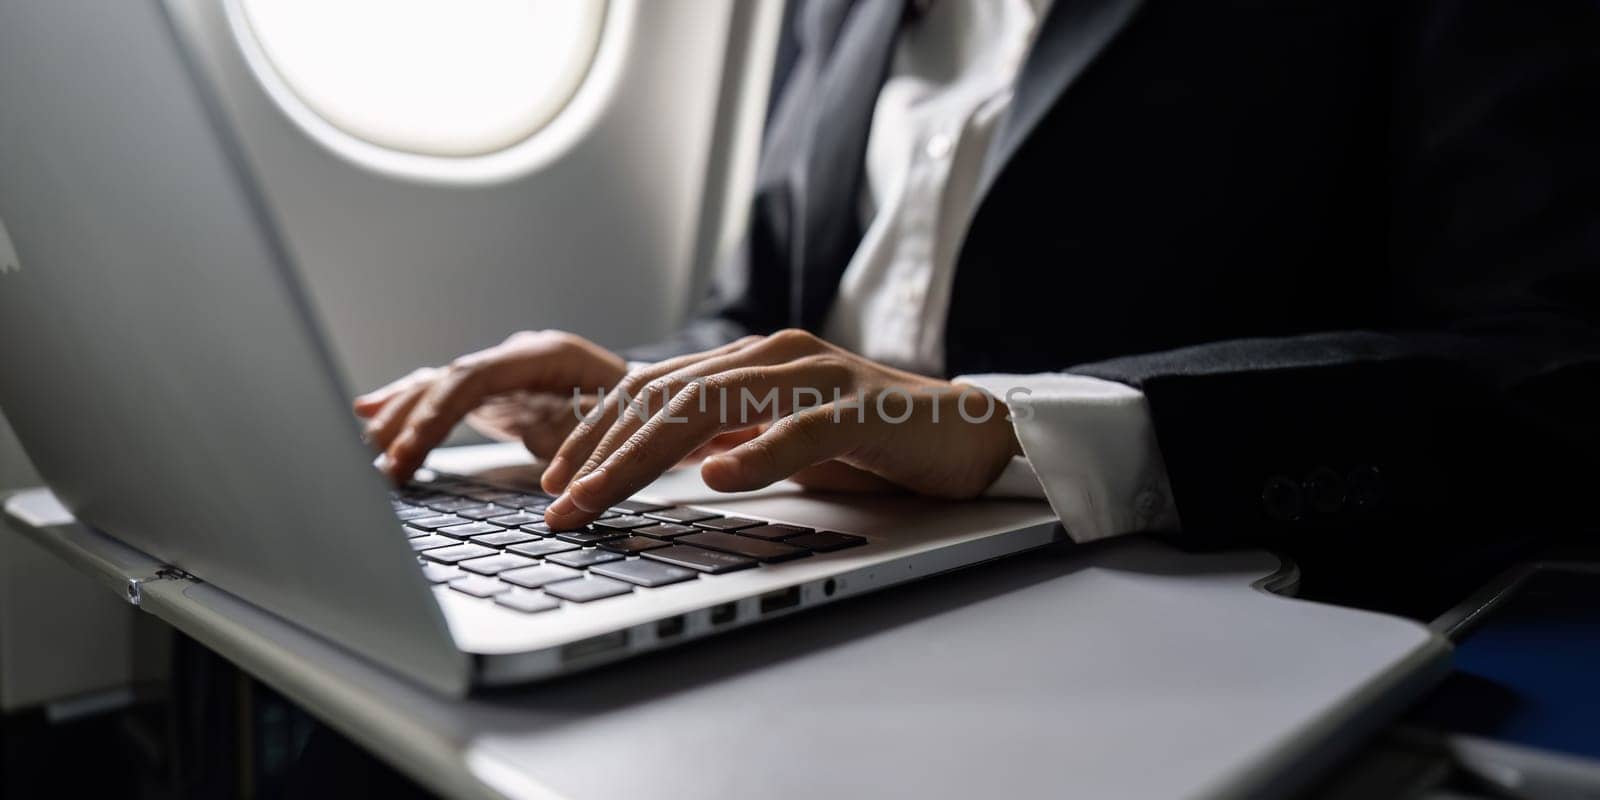 Beautiful Asian businesswoman working with laptop in aeroplane. working, travel, business concept.